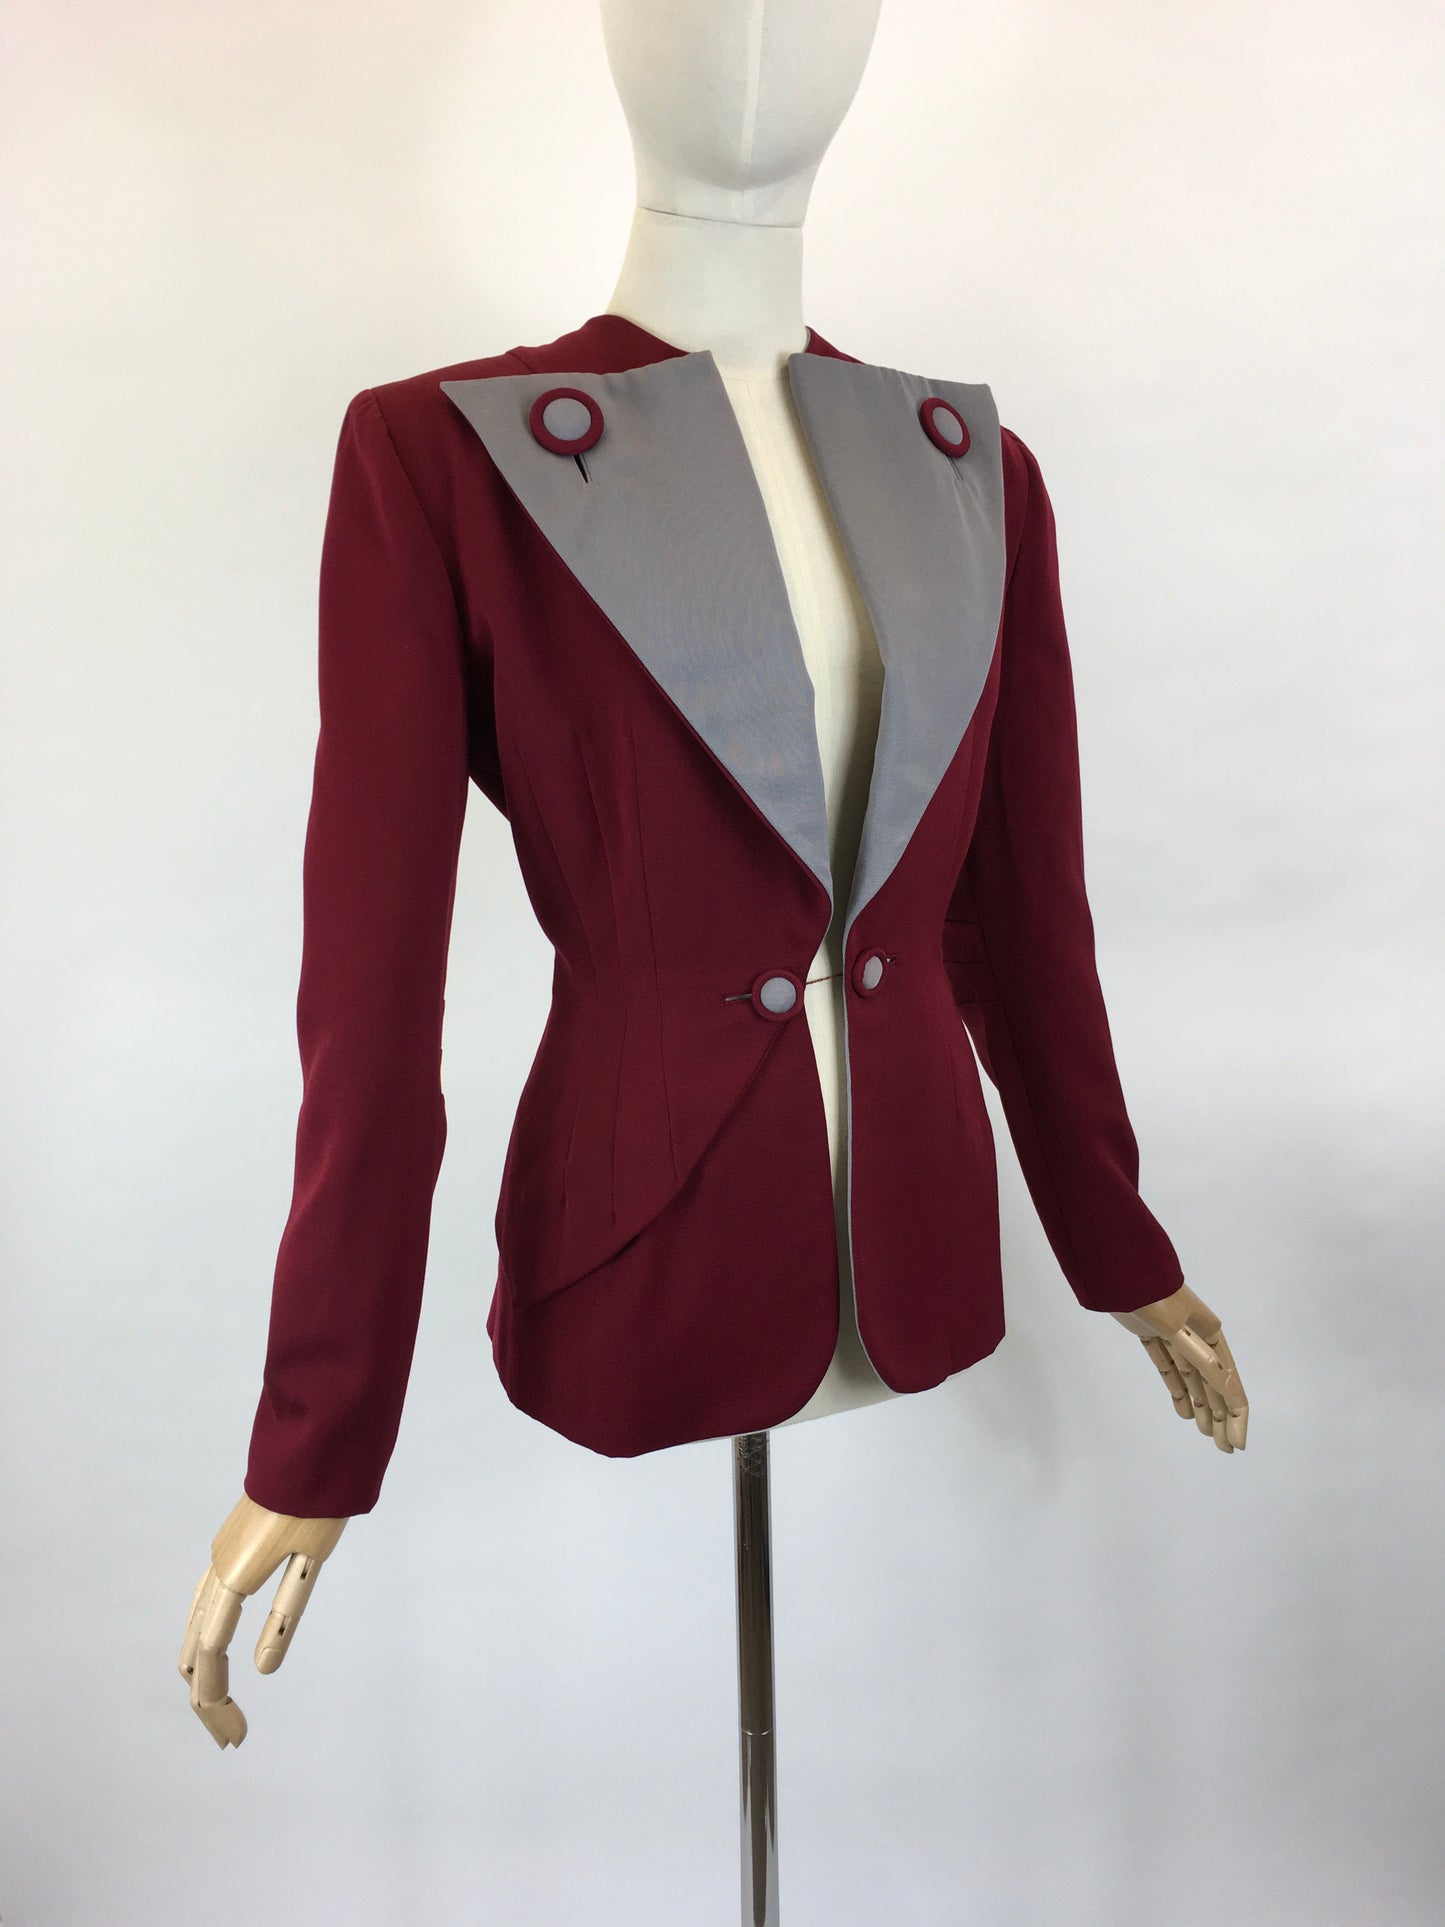 Original 1940’s SENSATIONAL 2 Tone Colour Block Jacket - In Warm Wine and French Grey